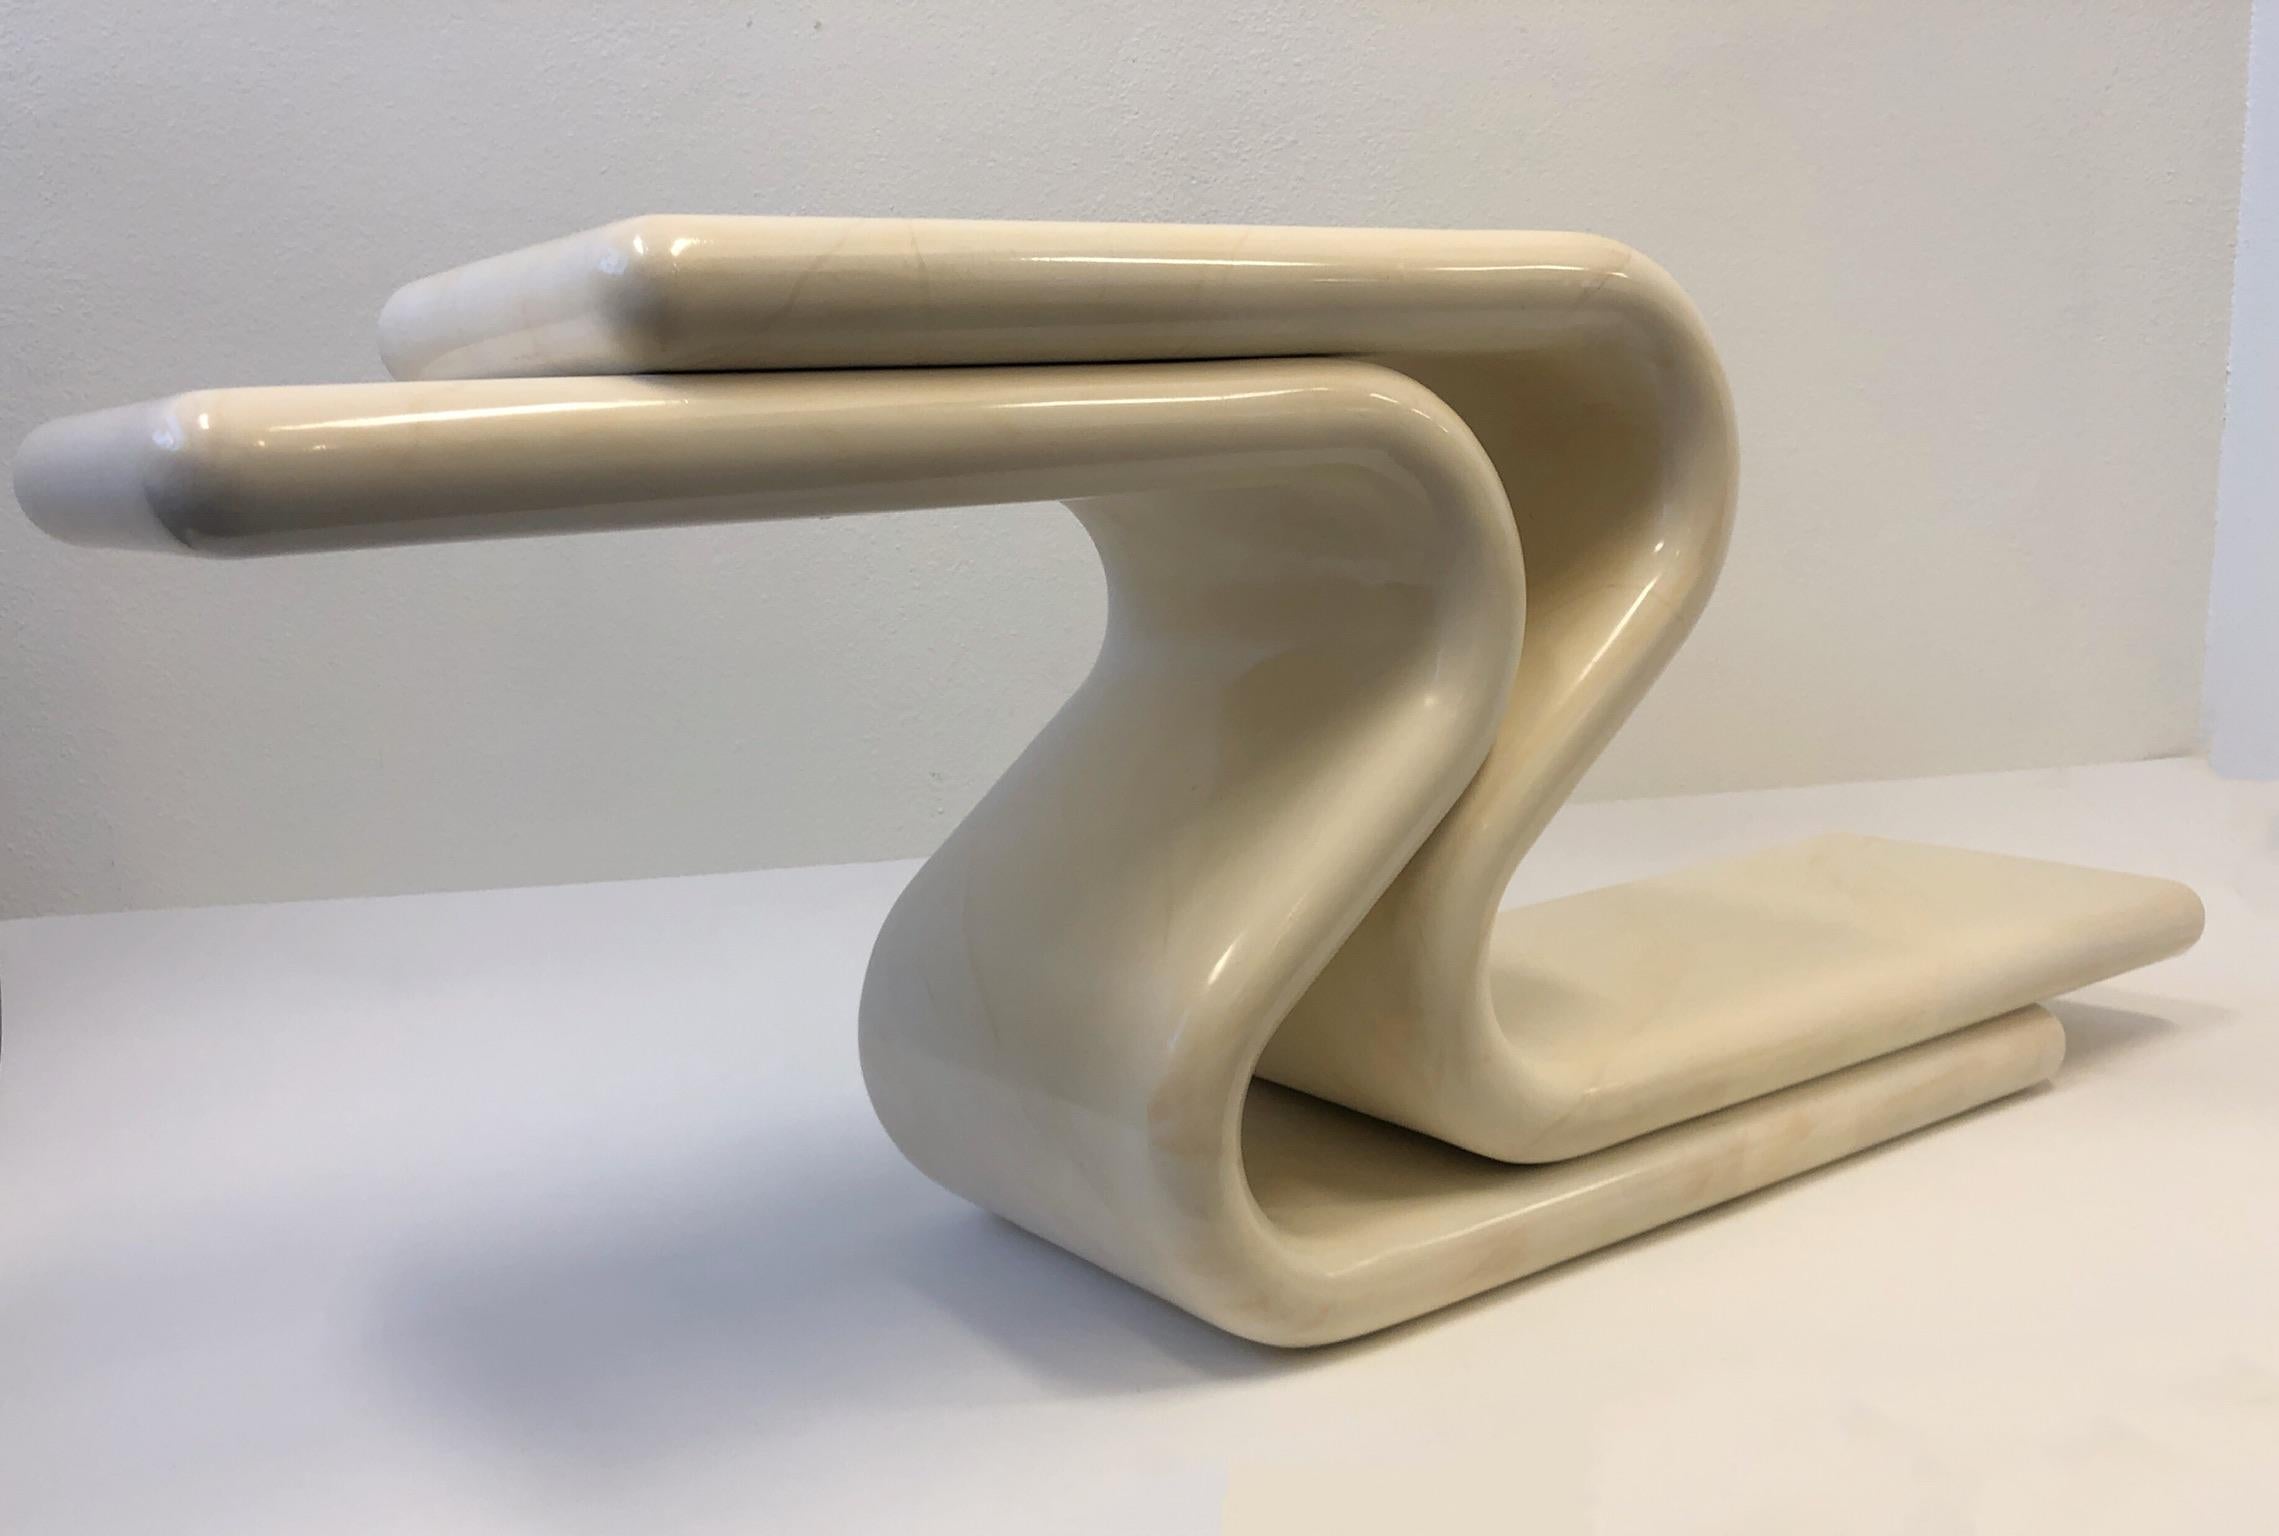 A spectacular 1980s high gloss polish lacquered sculptural console table by Steve Chase. The consoles finished is off white faux marble with a high gloss polished lacquered. This came out of a Steve Chase home in Rancho Mirage CA. 

Dimensions: